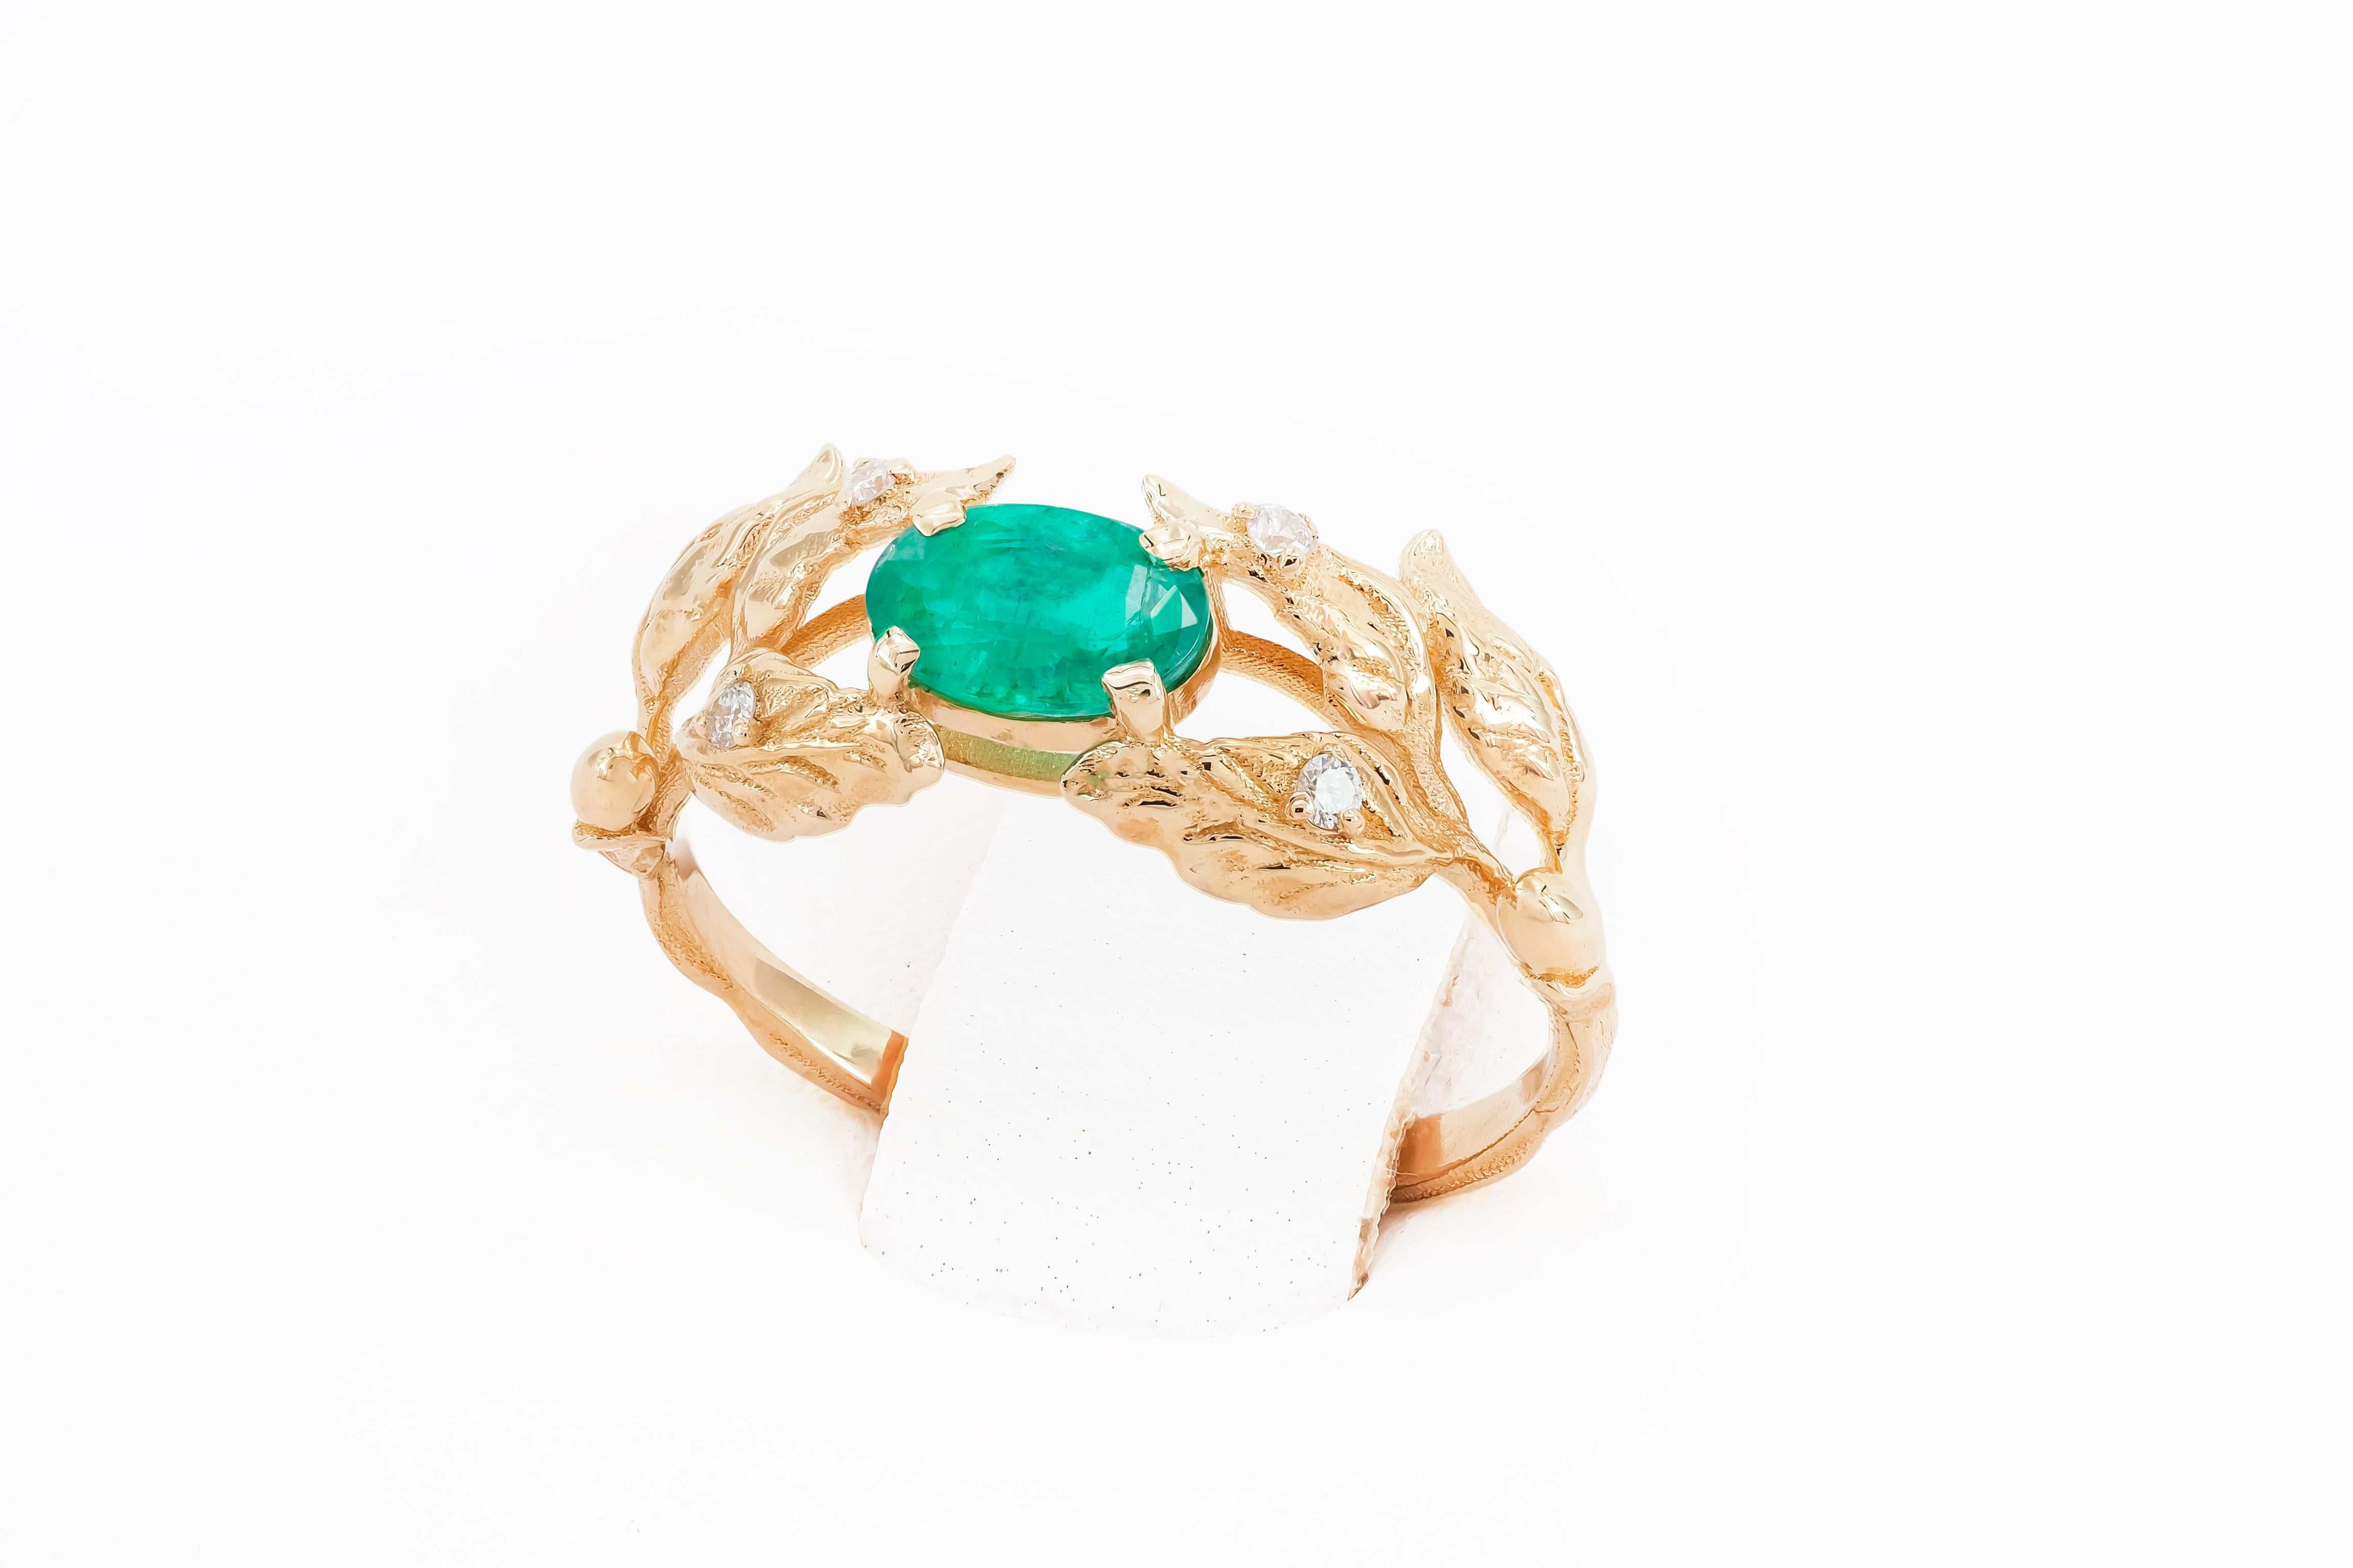 For Sale:  14 Karat Gold Olive Tree Ring with Emerald and Diamonds. 4